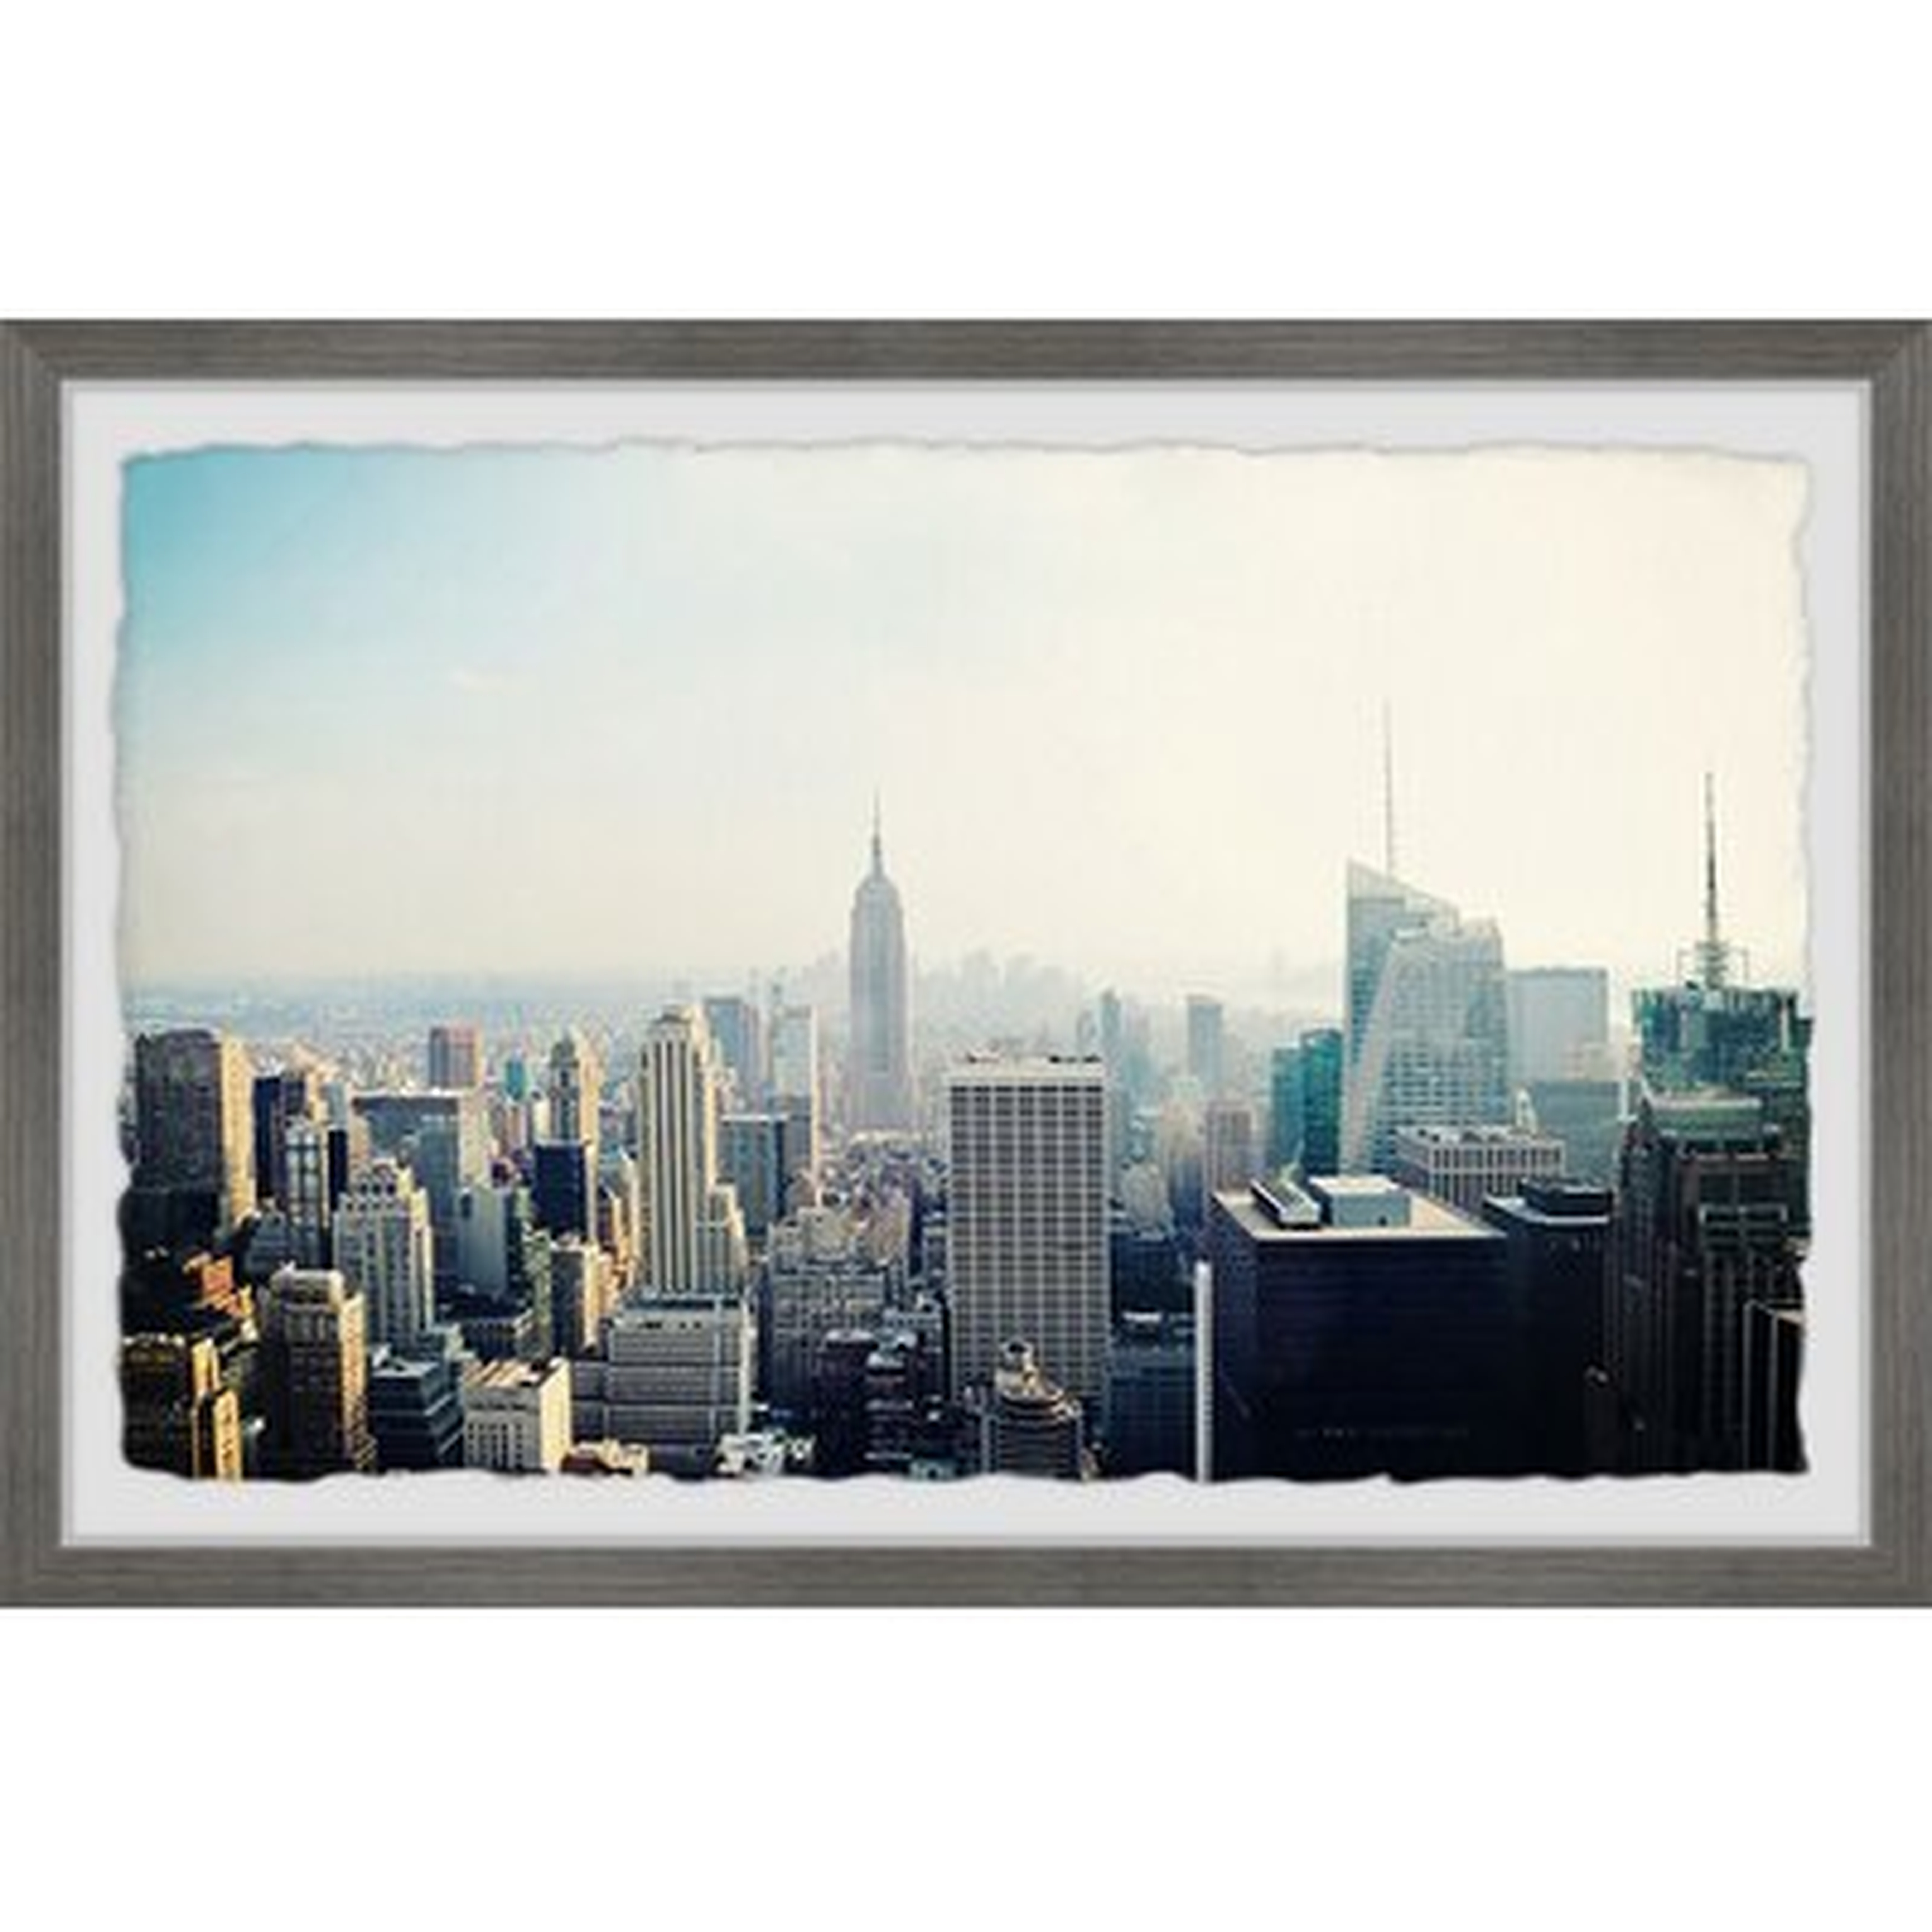 'At the Top of the City' Picture Frame Photograph Print on Paper, 24x36 - Wayfair